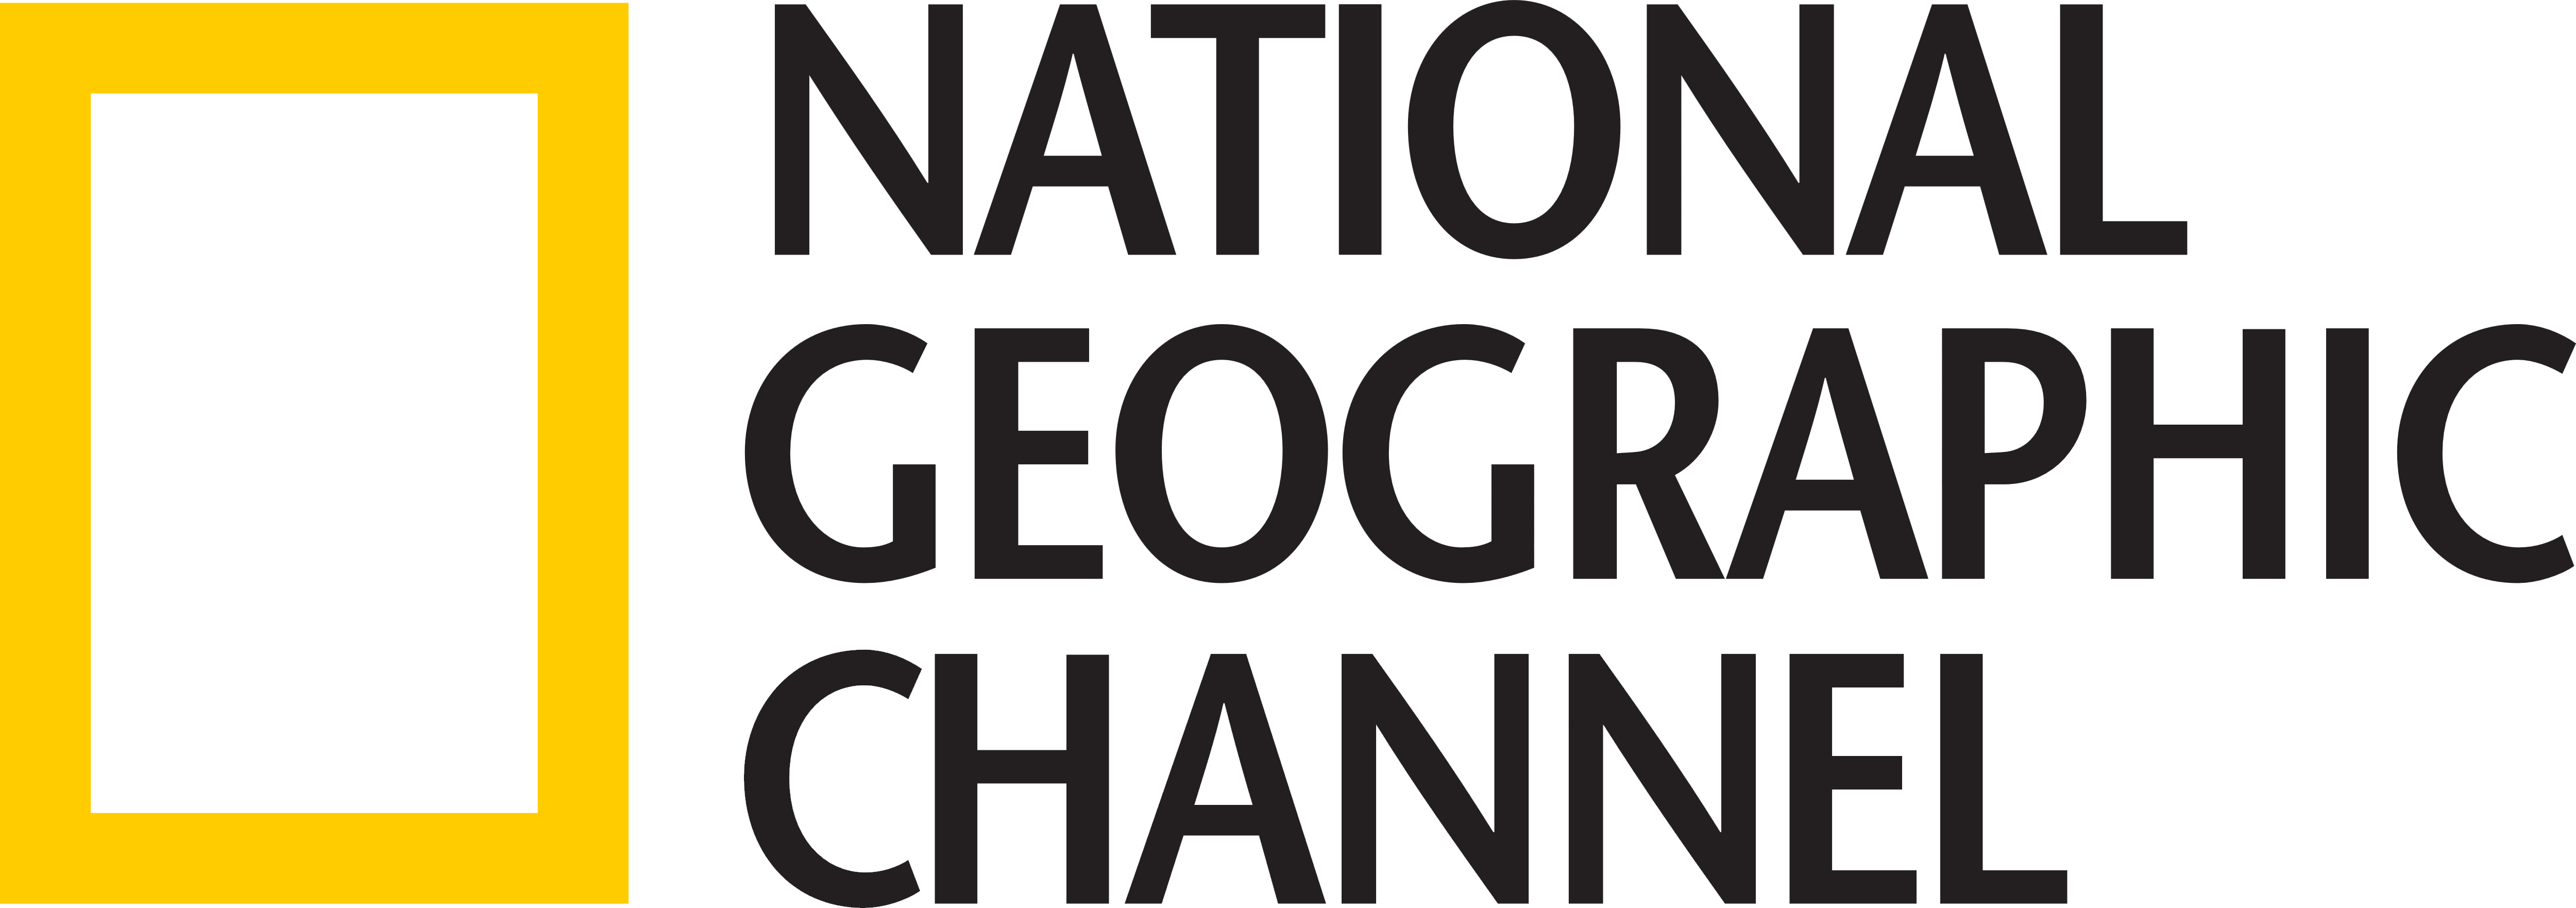 National Geographic Logo - National Geographic